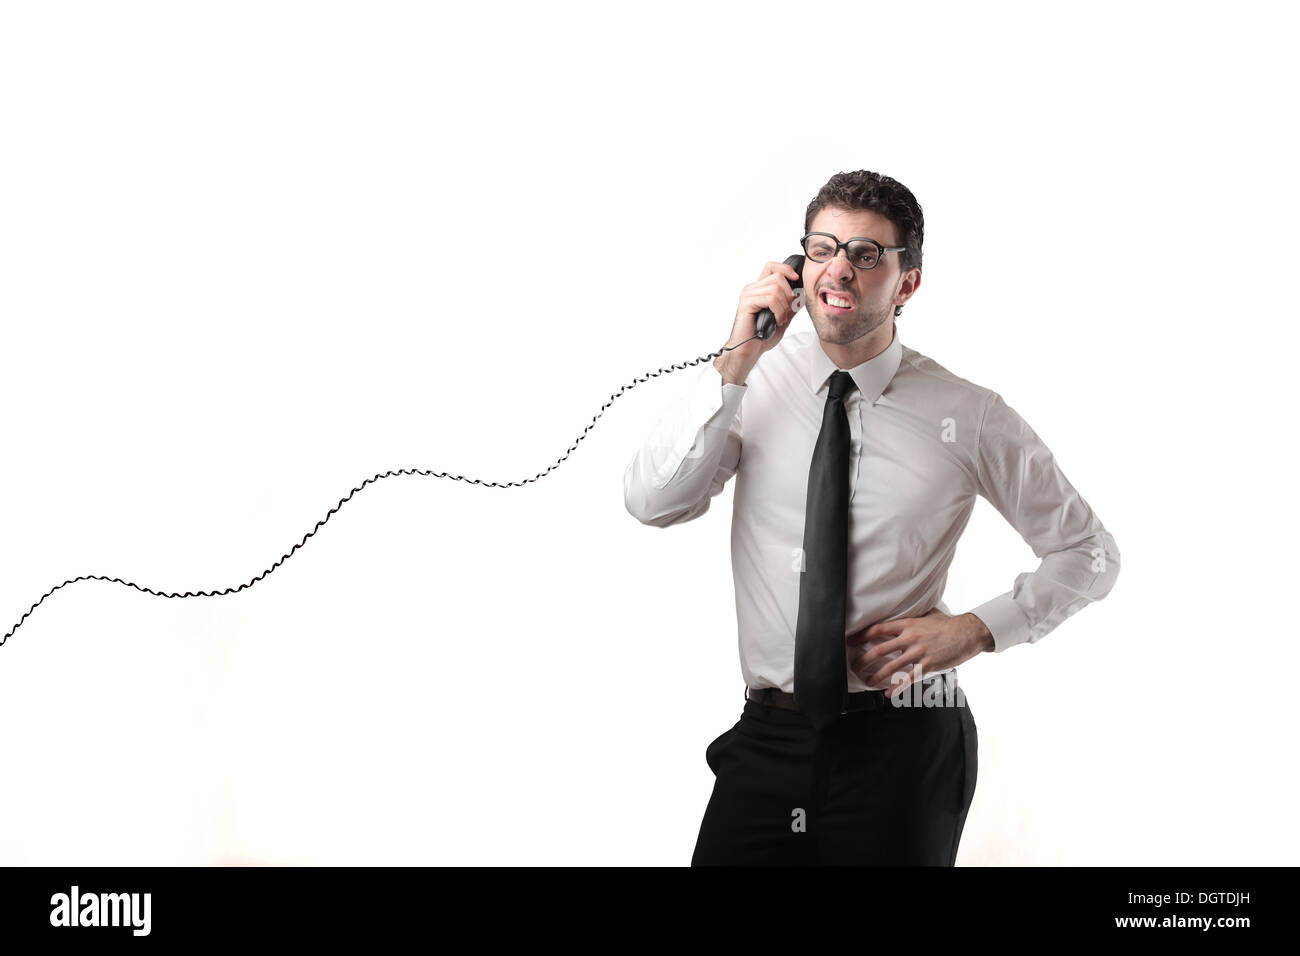 Office worker calling someone with a phone Stock Photo